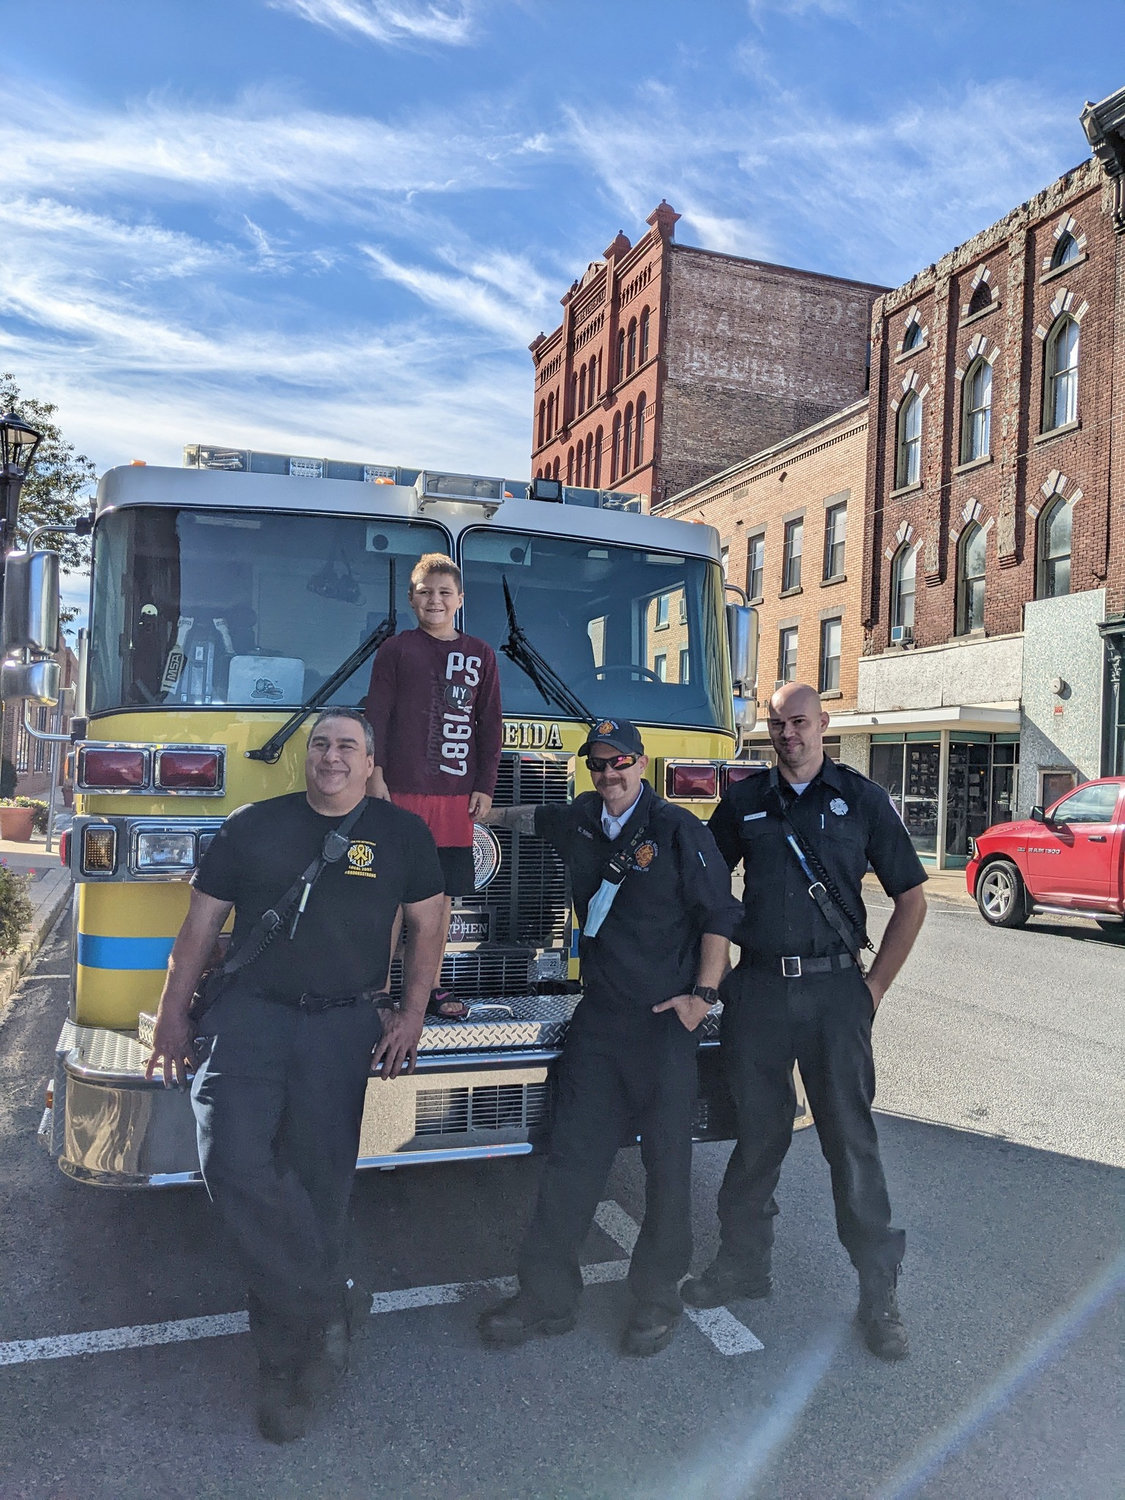 Eight-year-old Dominic Diaz was happy to pose for a photo with members of the Oneida Fire Department who helped deliver a brand new bed for him that was built and donated by Sleep in Heavenly Peace’s Syracuse chapter.